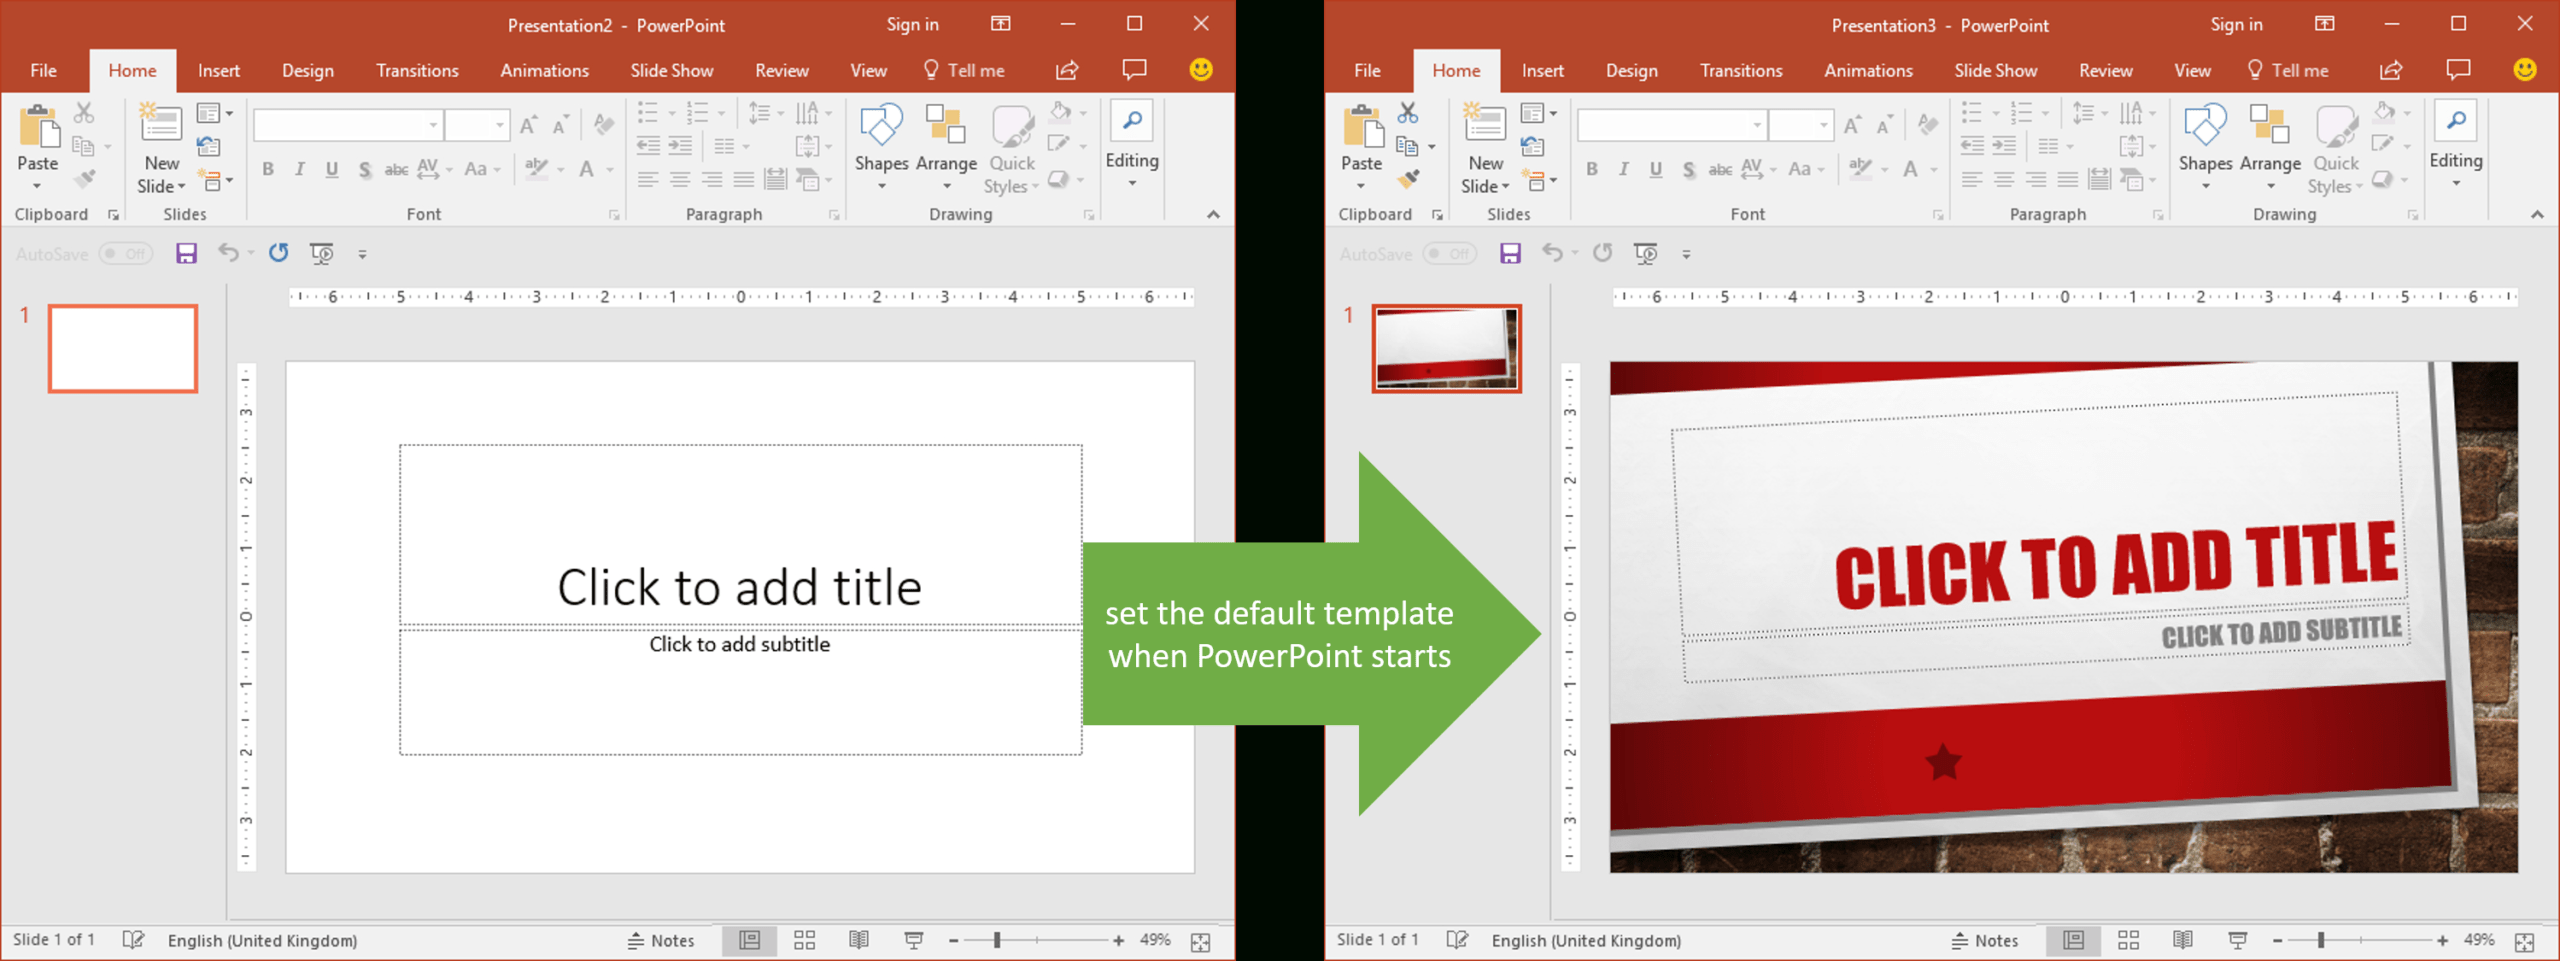 Set The Default Template When Powerpoint Starts | Youpresent Pertaining To Where Are Powerpoint Templates Stored